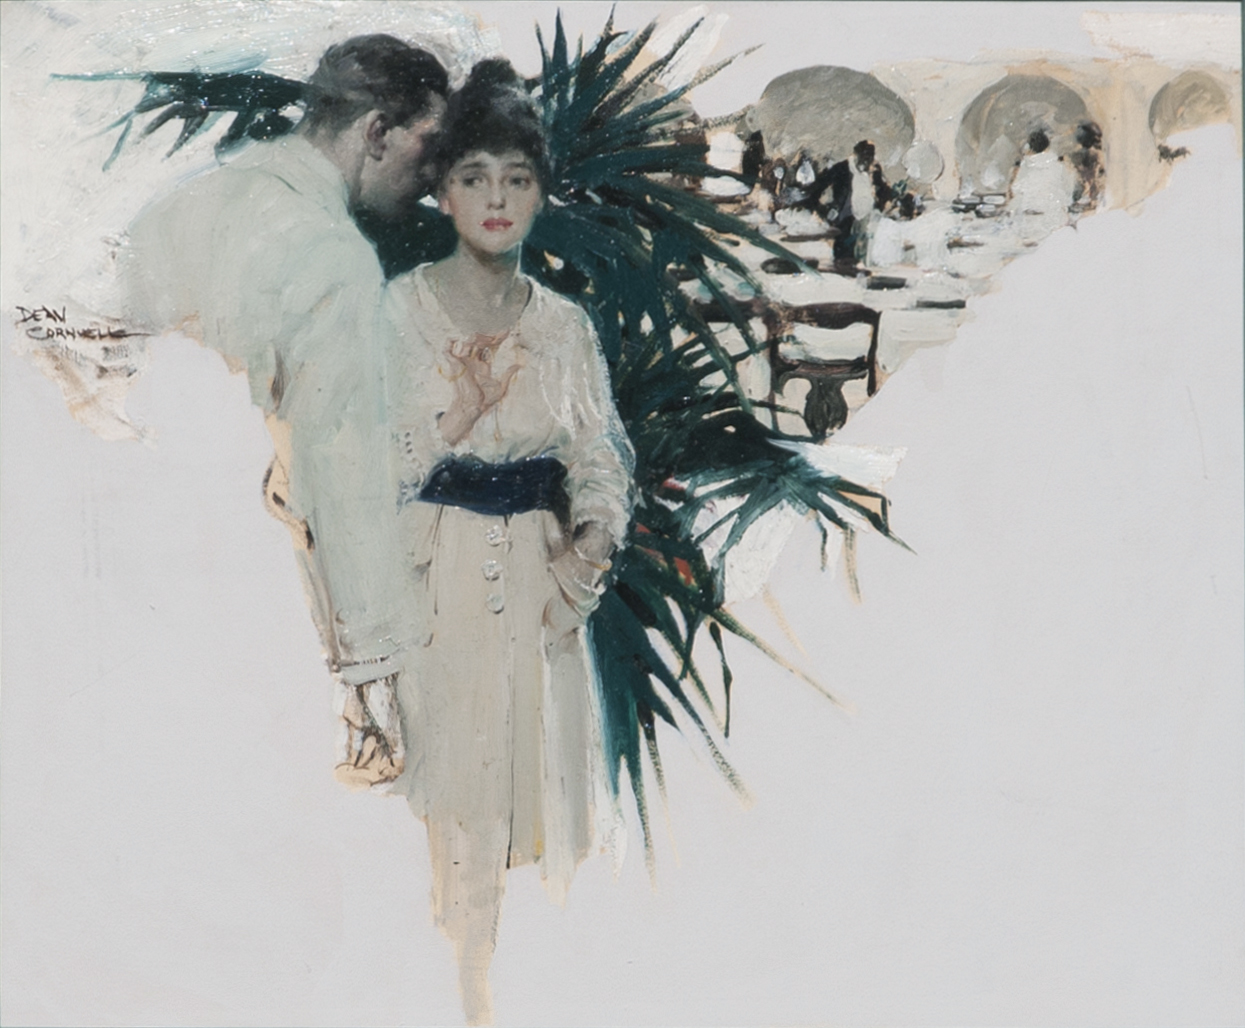 Mixed Media on Paper Illustration by Dean Cornwell (SOLD